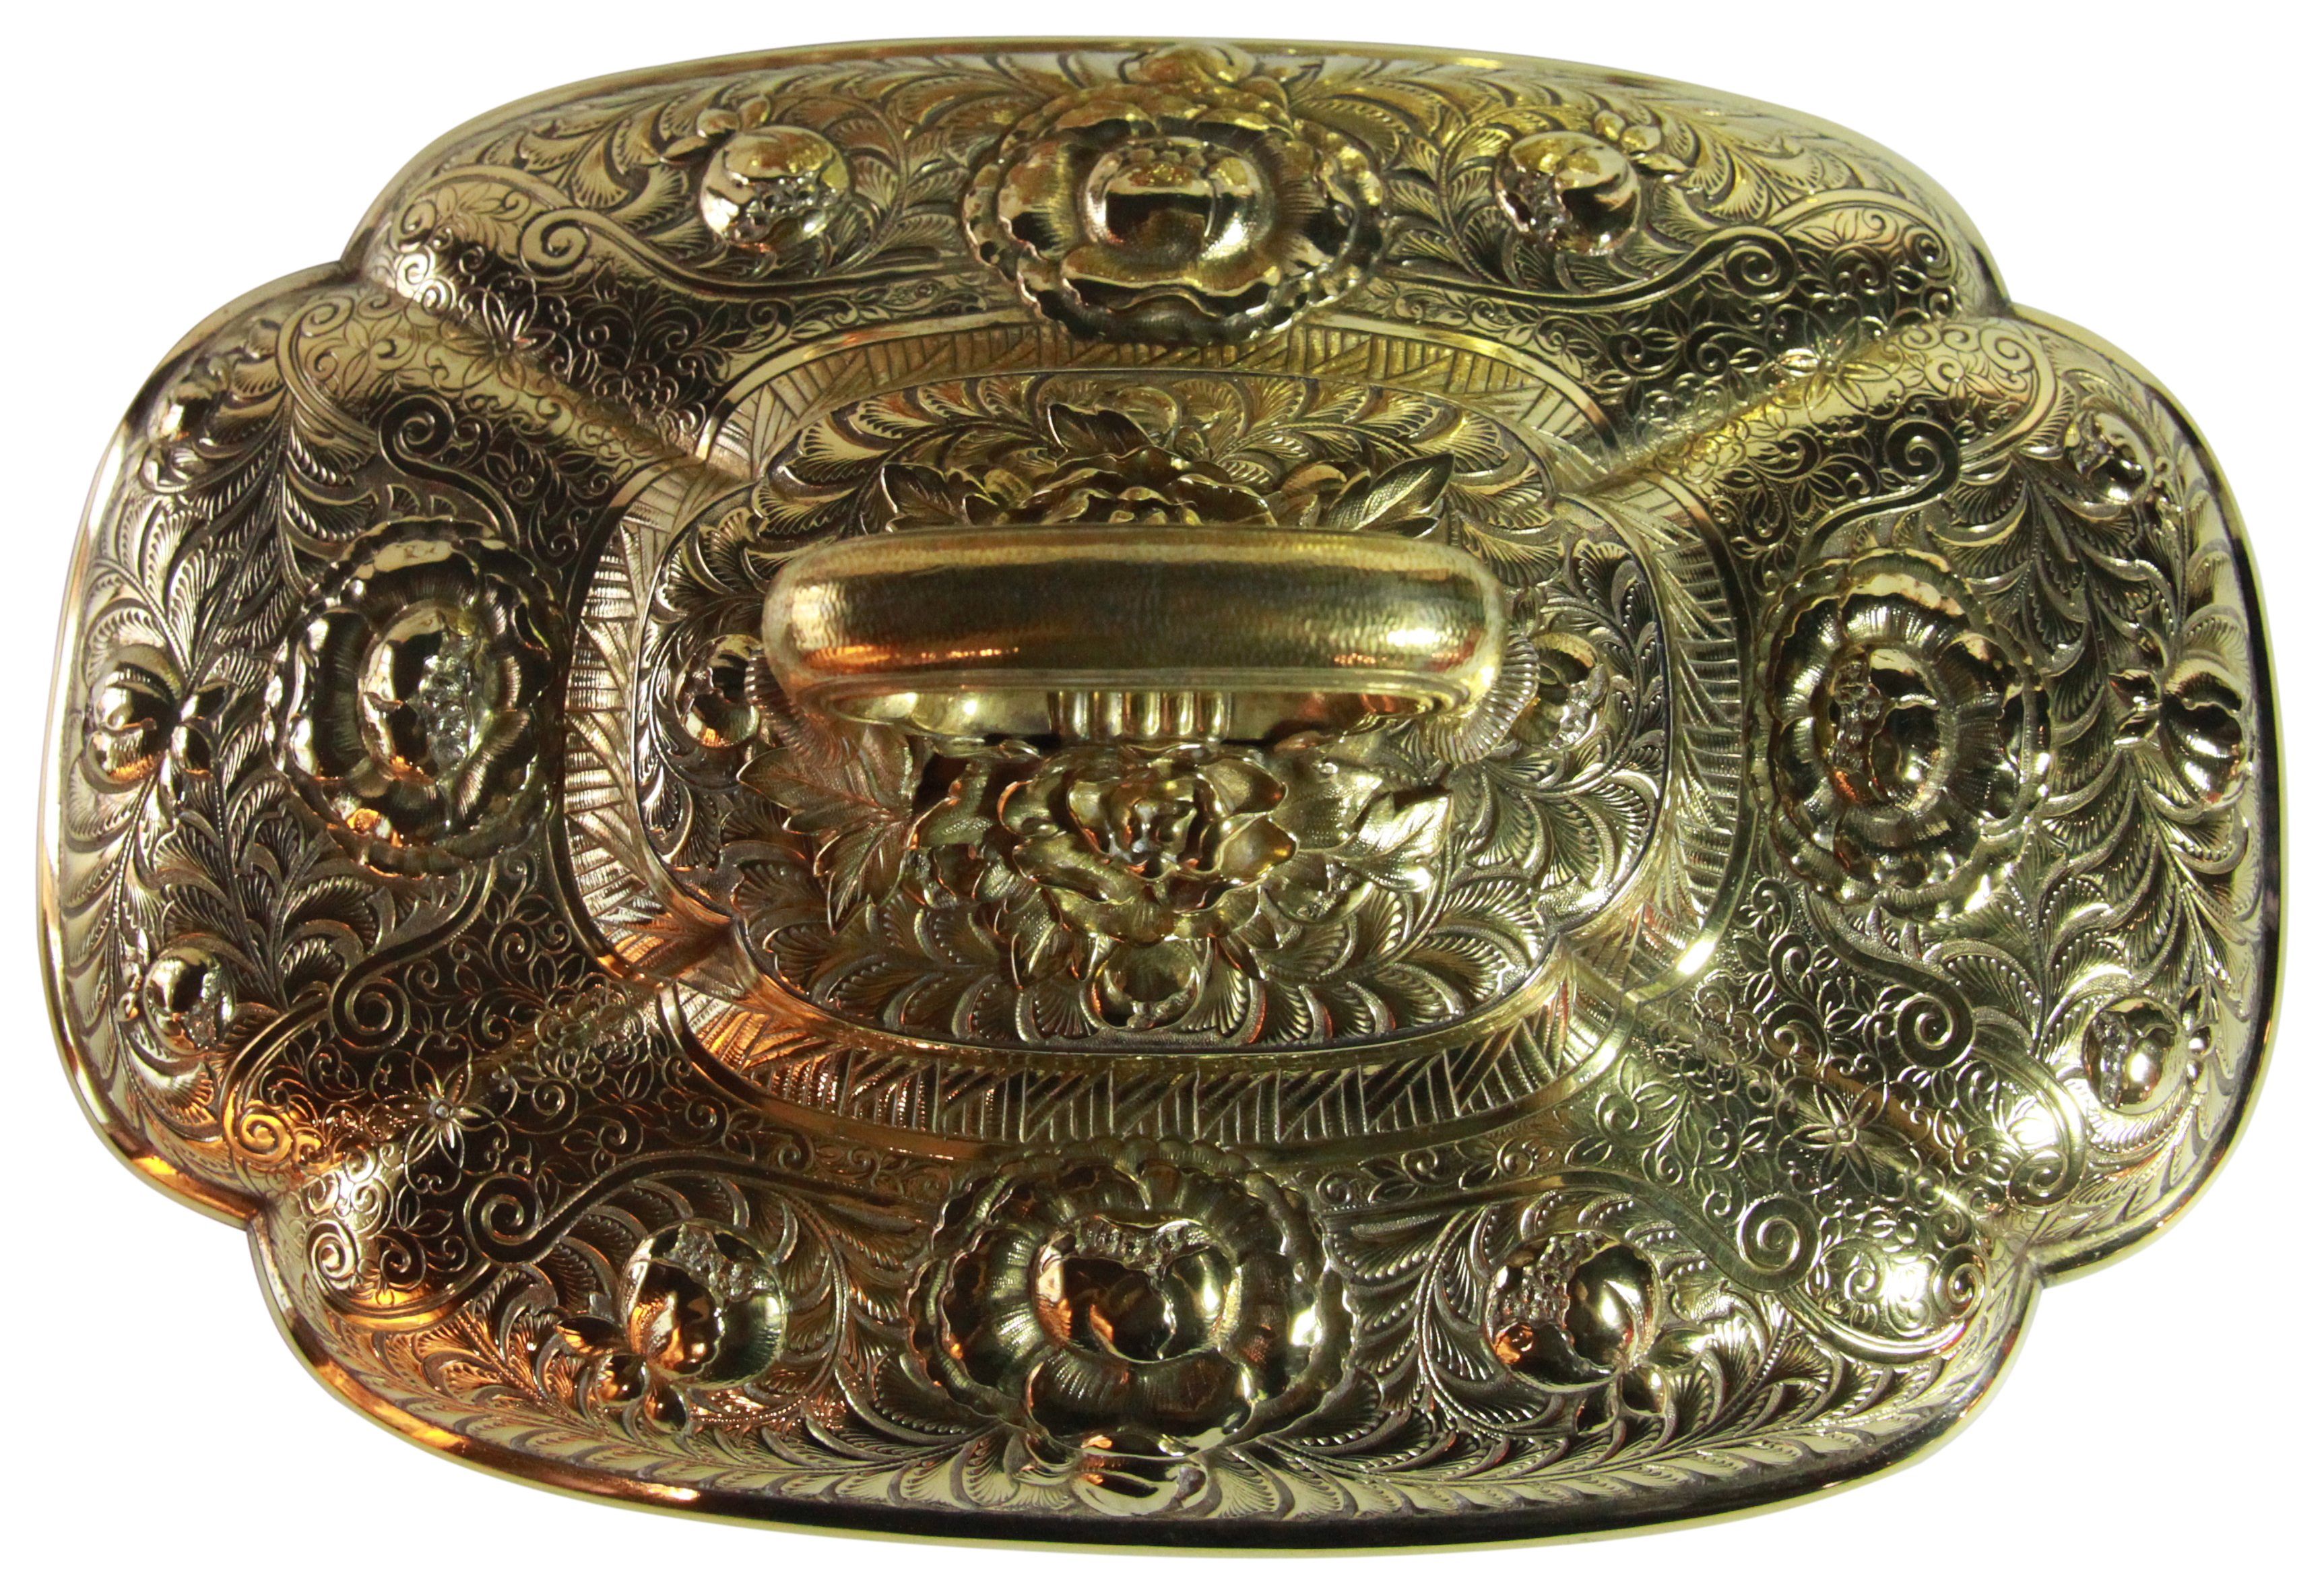 A superb American silver gilt tureen & cover decorated in the Chinese Chippendale taste amongst - Image 3 of 6